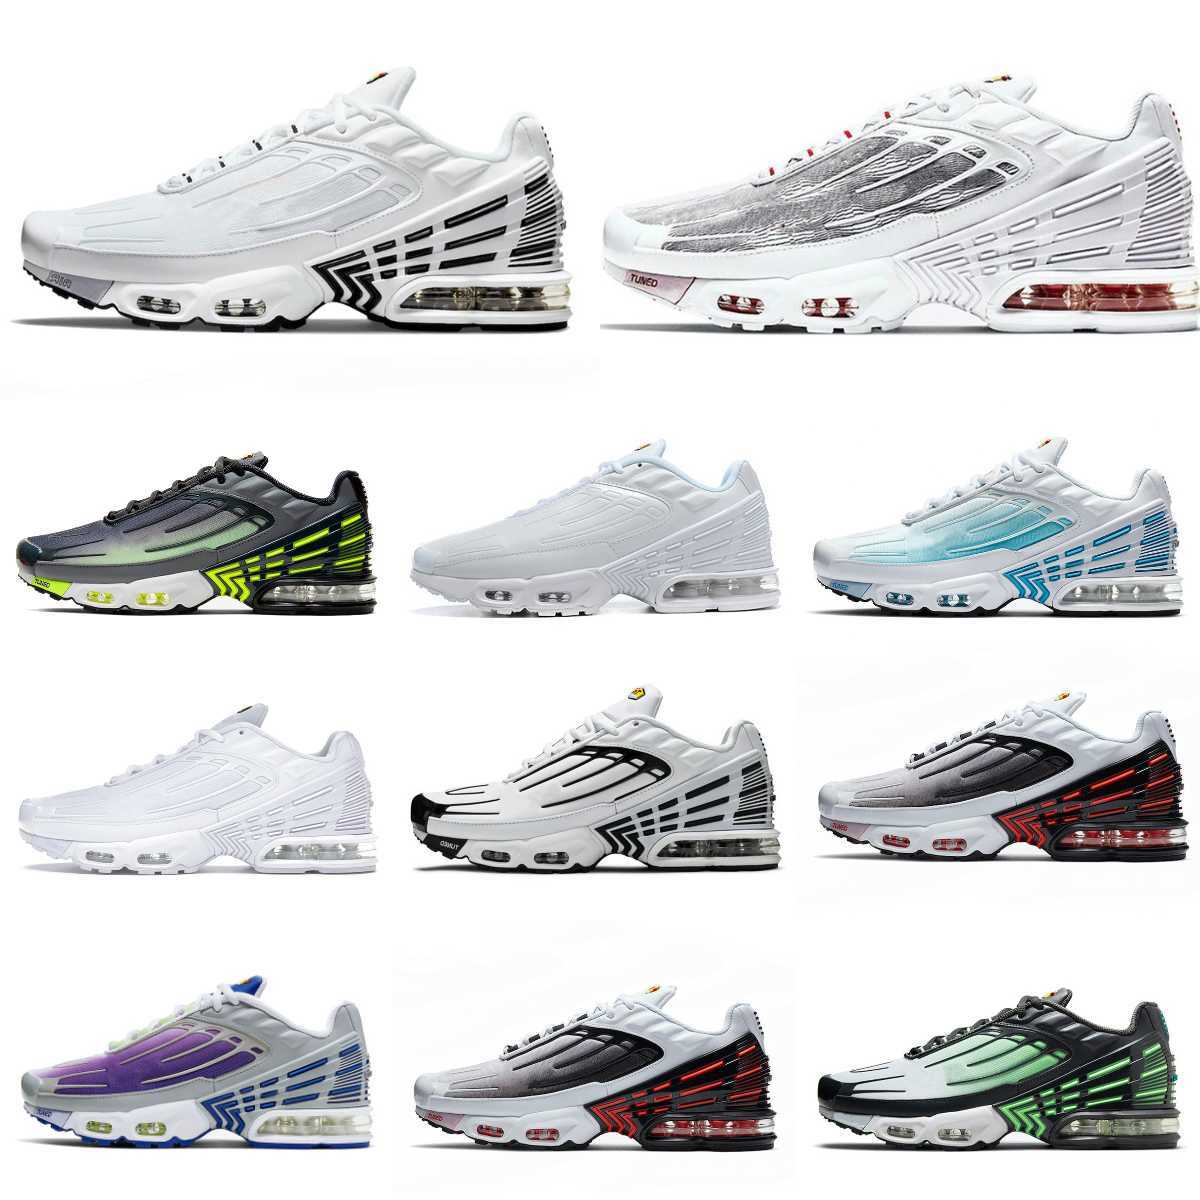 

Discount Tn Plus 3 Tuned Men Sports Shoes 3s Laser Blue White Red AIRMAXS Obsidian Hyper Violet Deep Parachute Ghost Green Triple Black Leather Trainer Sneakers S9, Please contact us